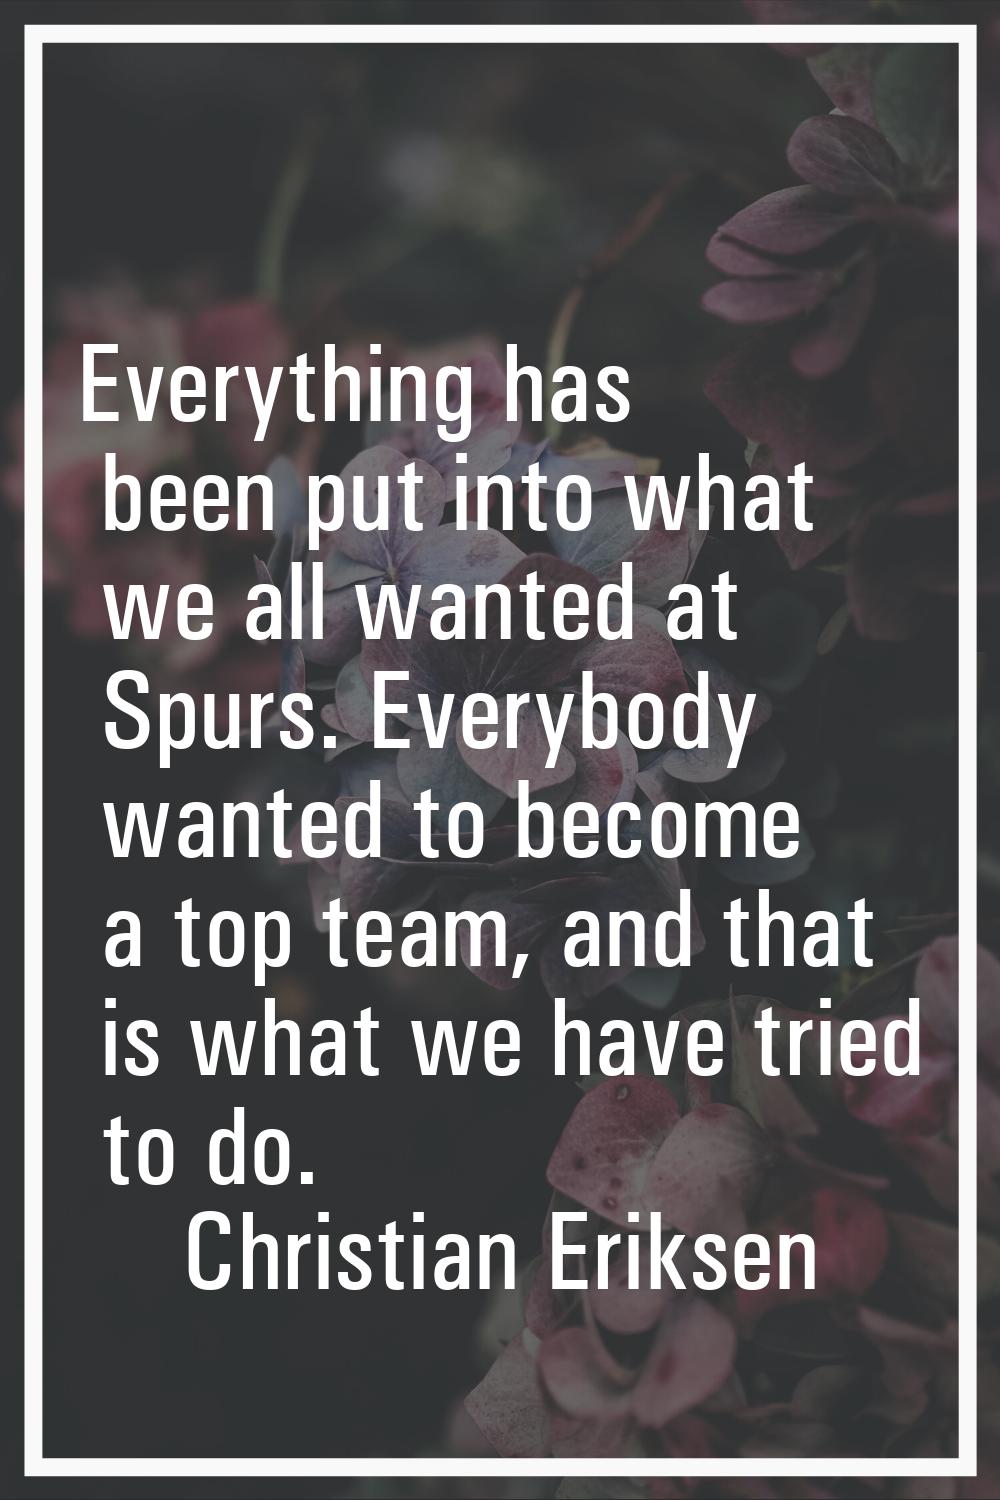 Everything has been put into what we all wanted at Spurs. Everybody wanted to become a top team, an